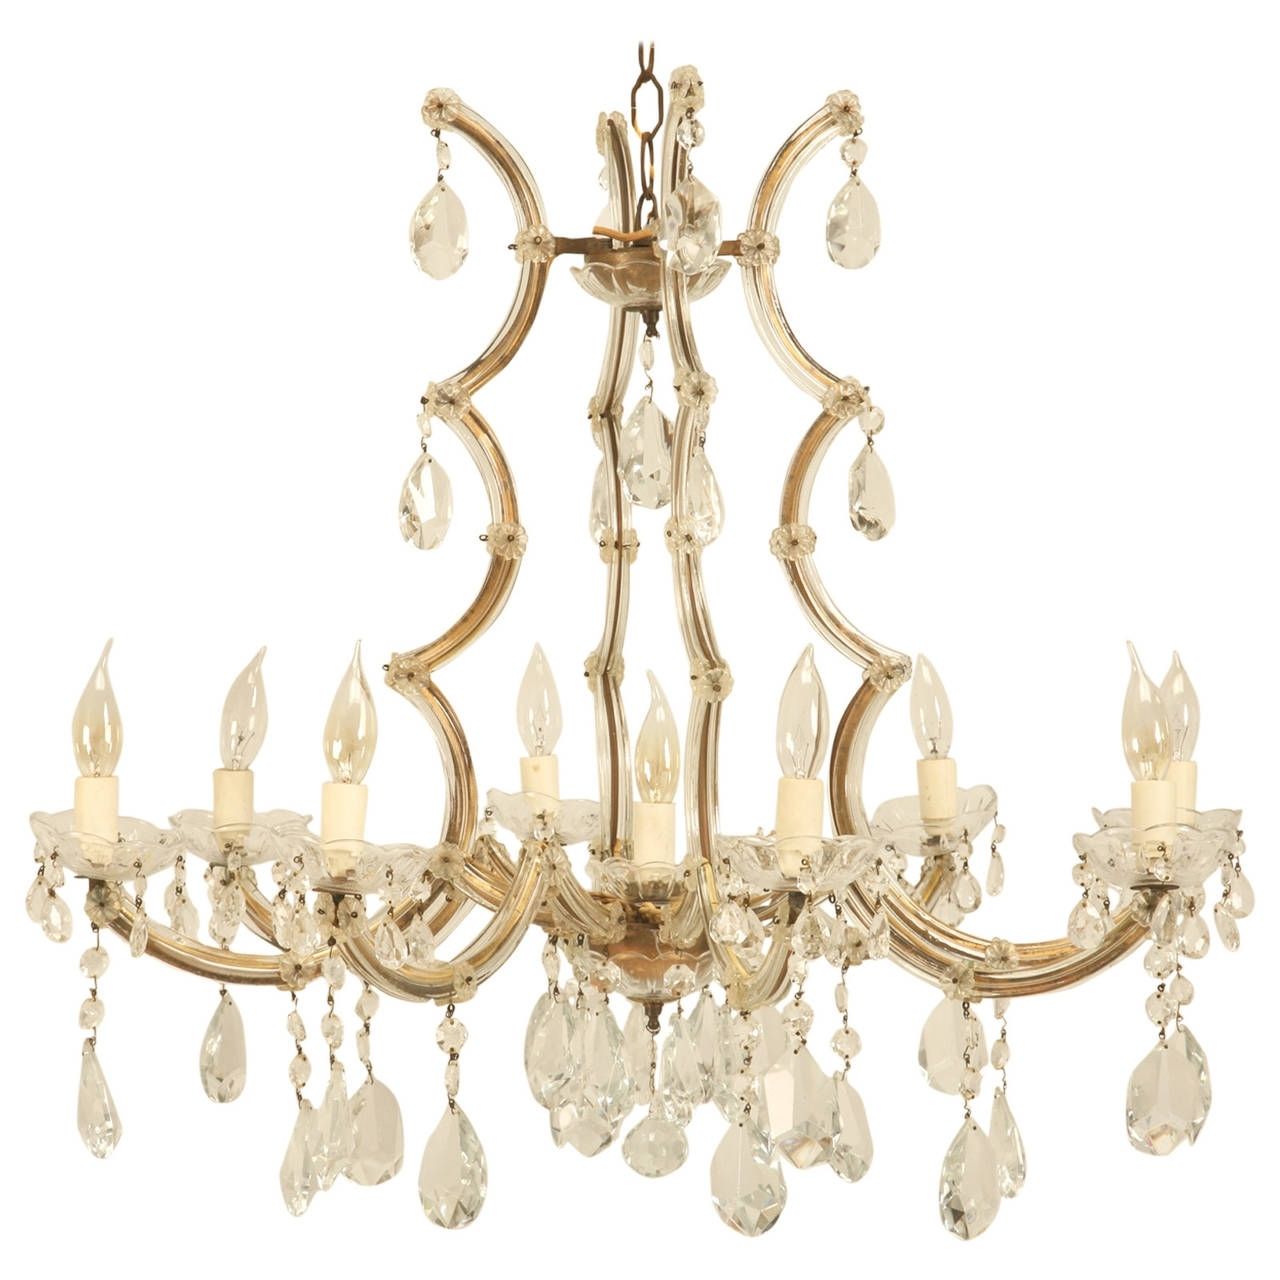 Baroque Chandelier Throughout Most Recent Spanish Chandelier In A Baroque Style, Circa 1930s For Sale At 1stdibs (View 15 of 20)